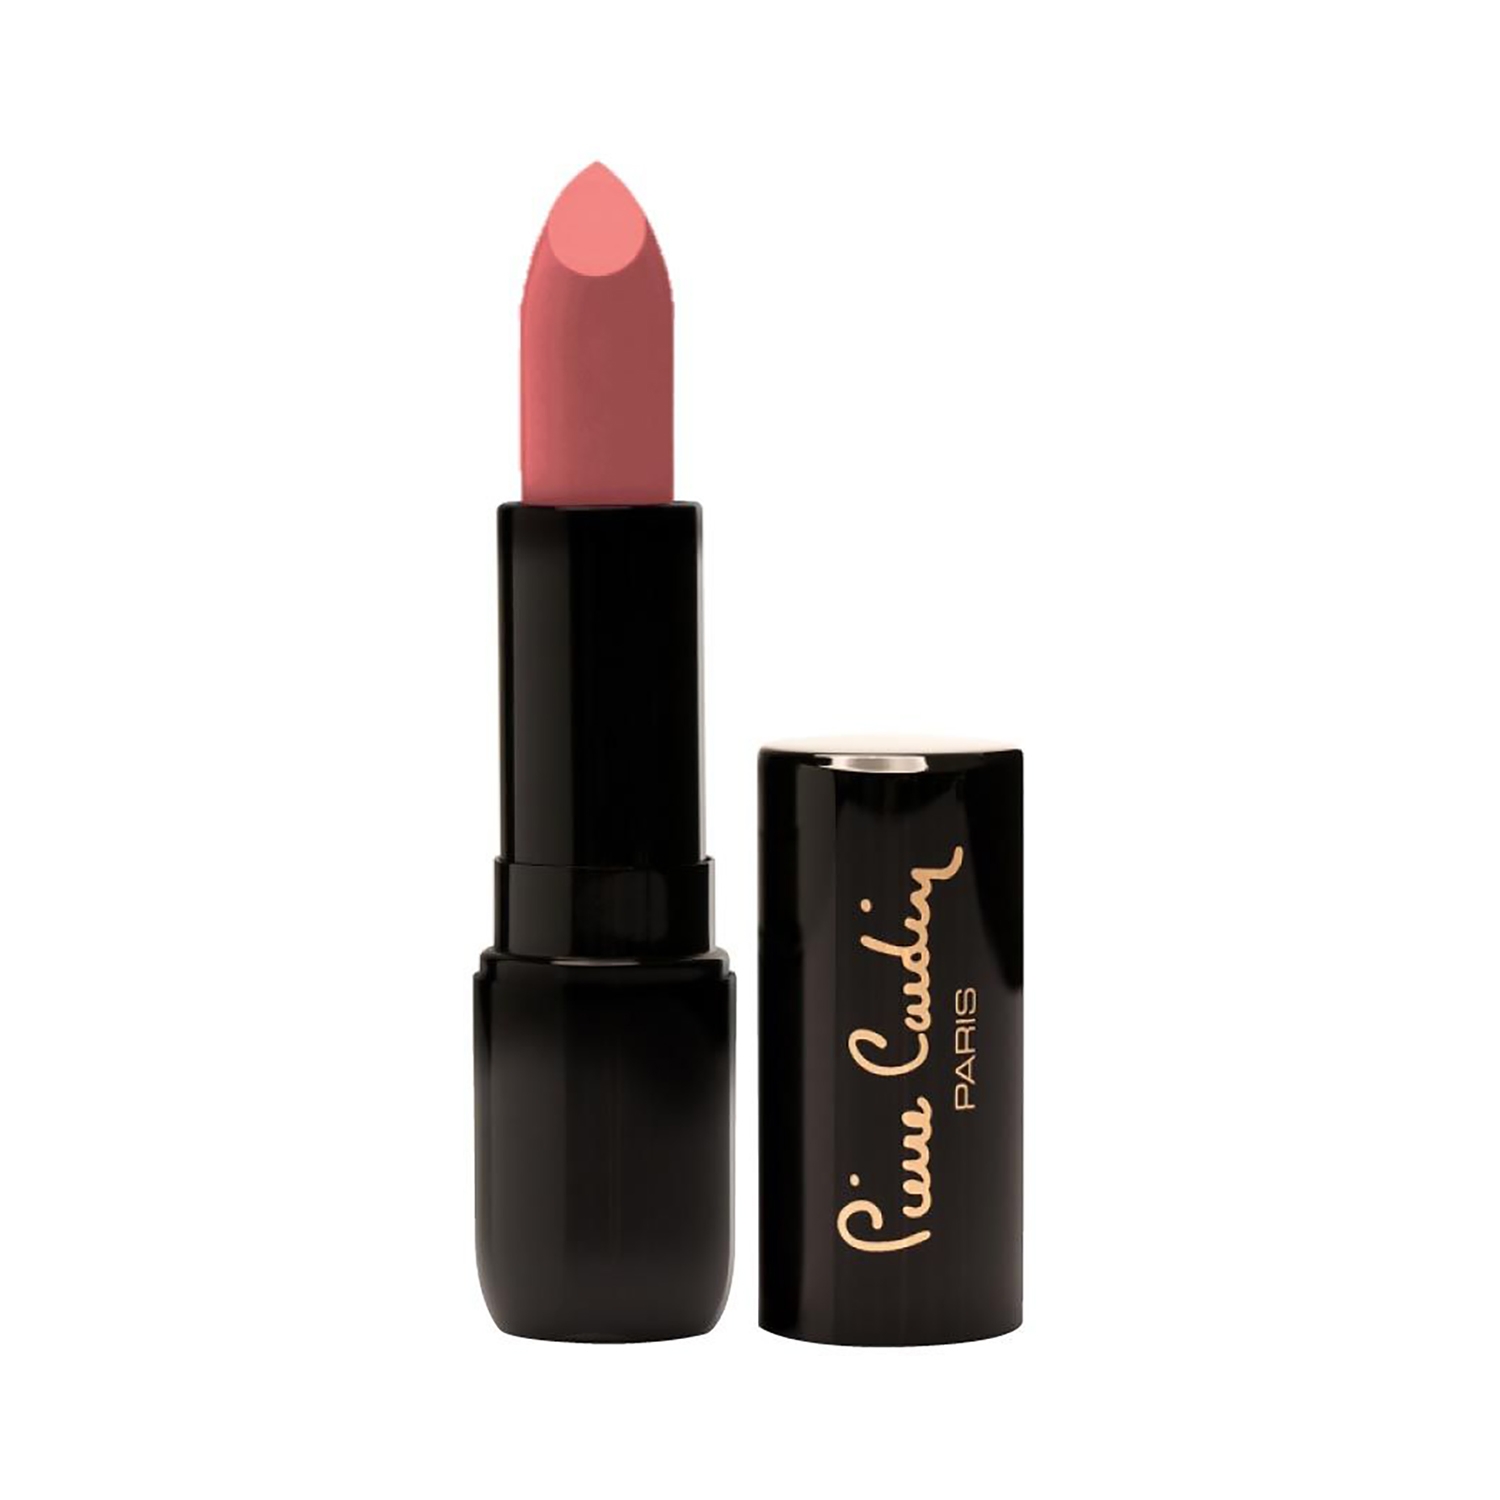 Pierre Cardin Paris | Pierre Cardin Paris Porcelain Edition Rouge Lipstick - 233 Creamy Coral (4g)